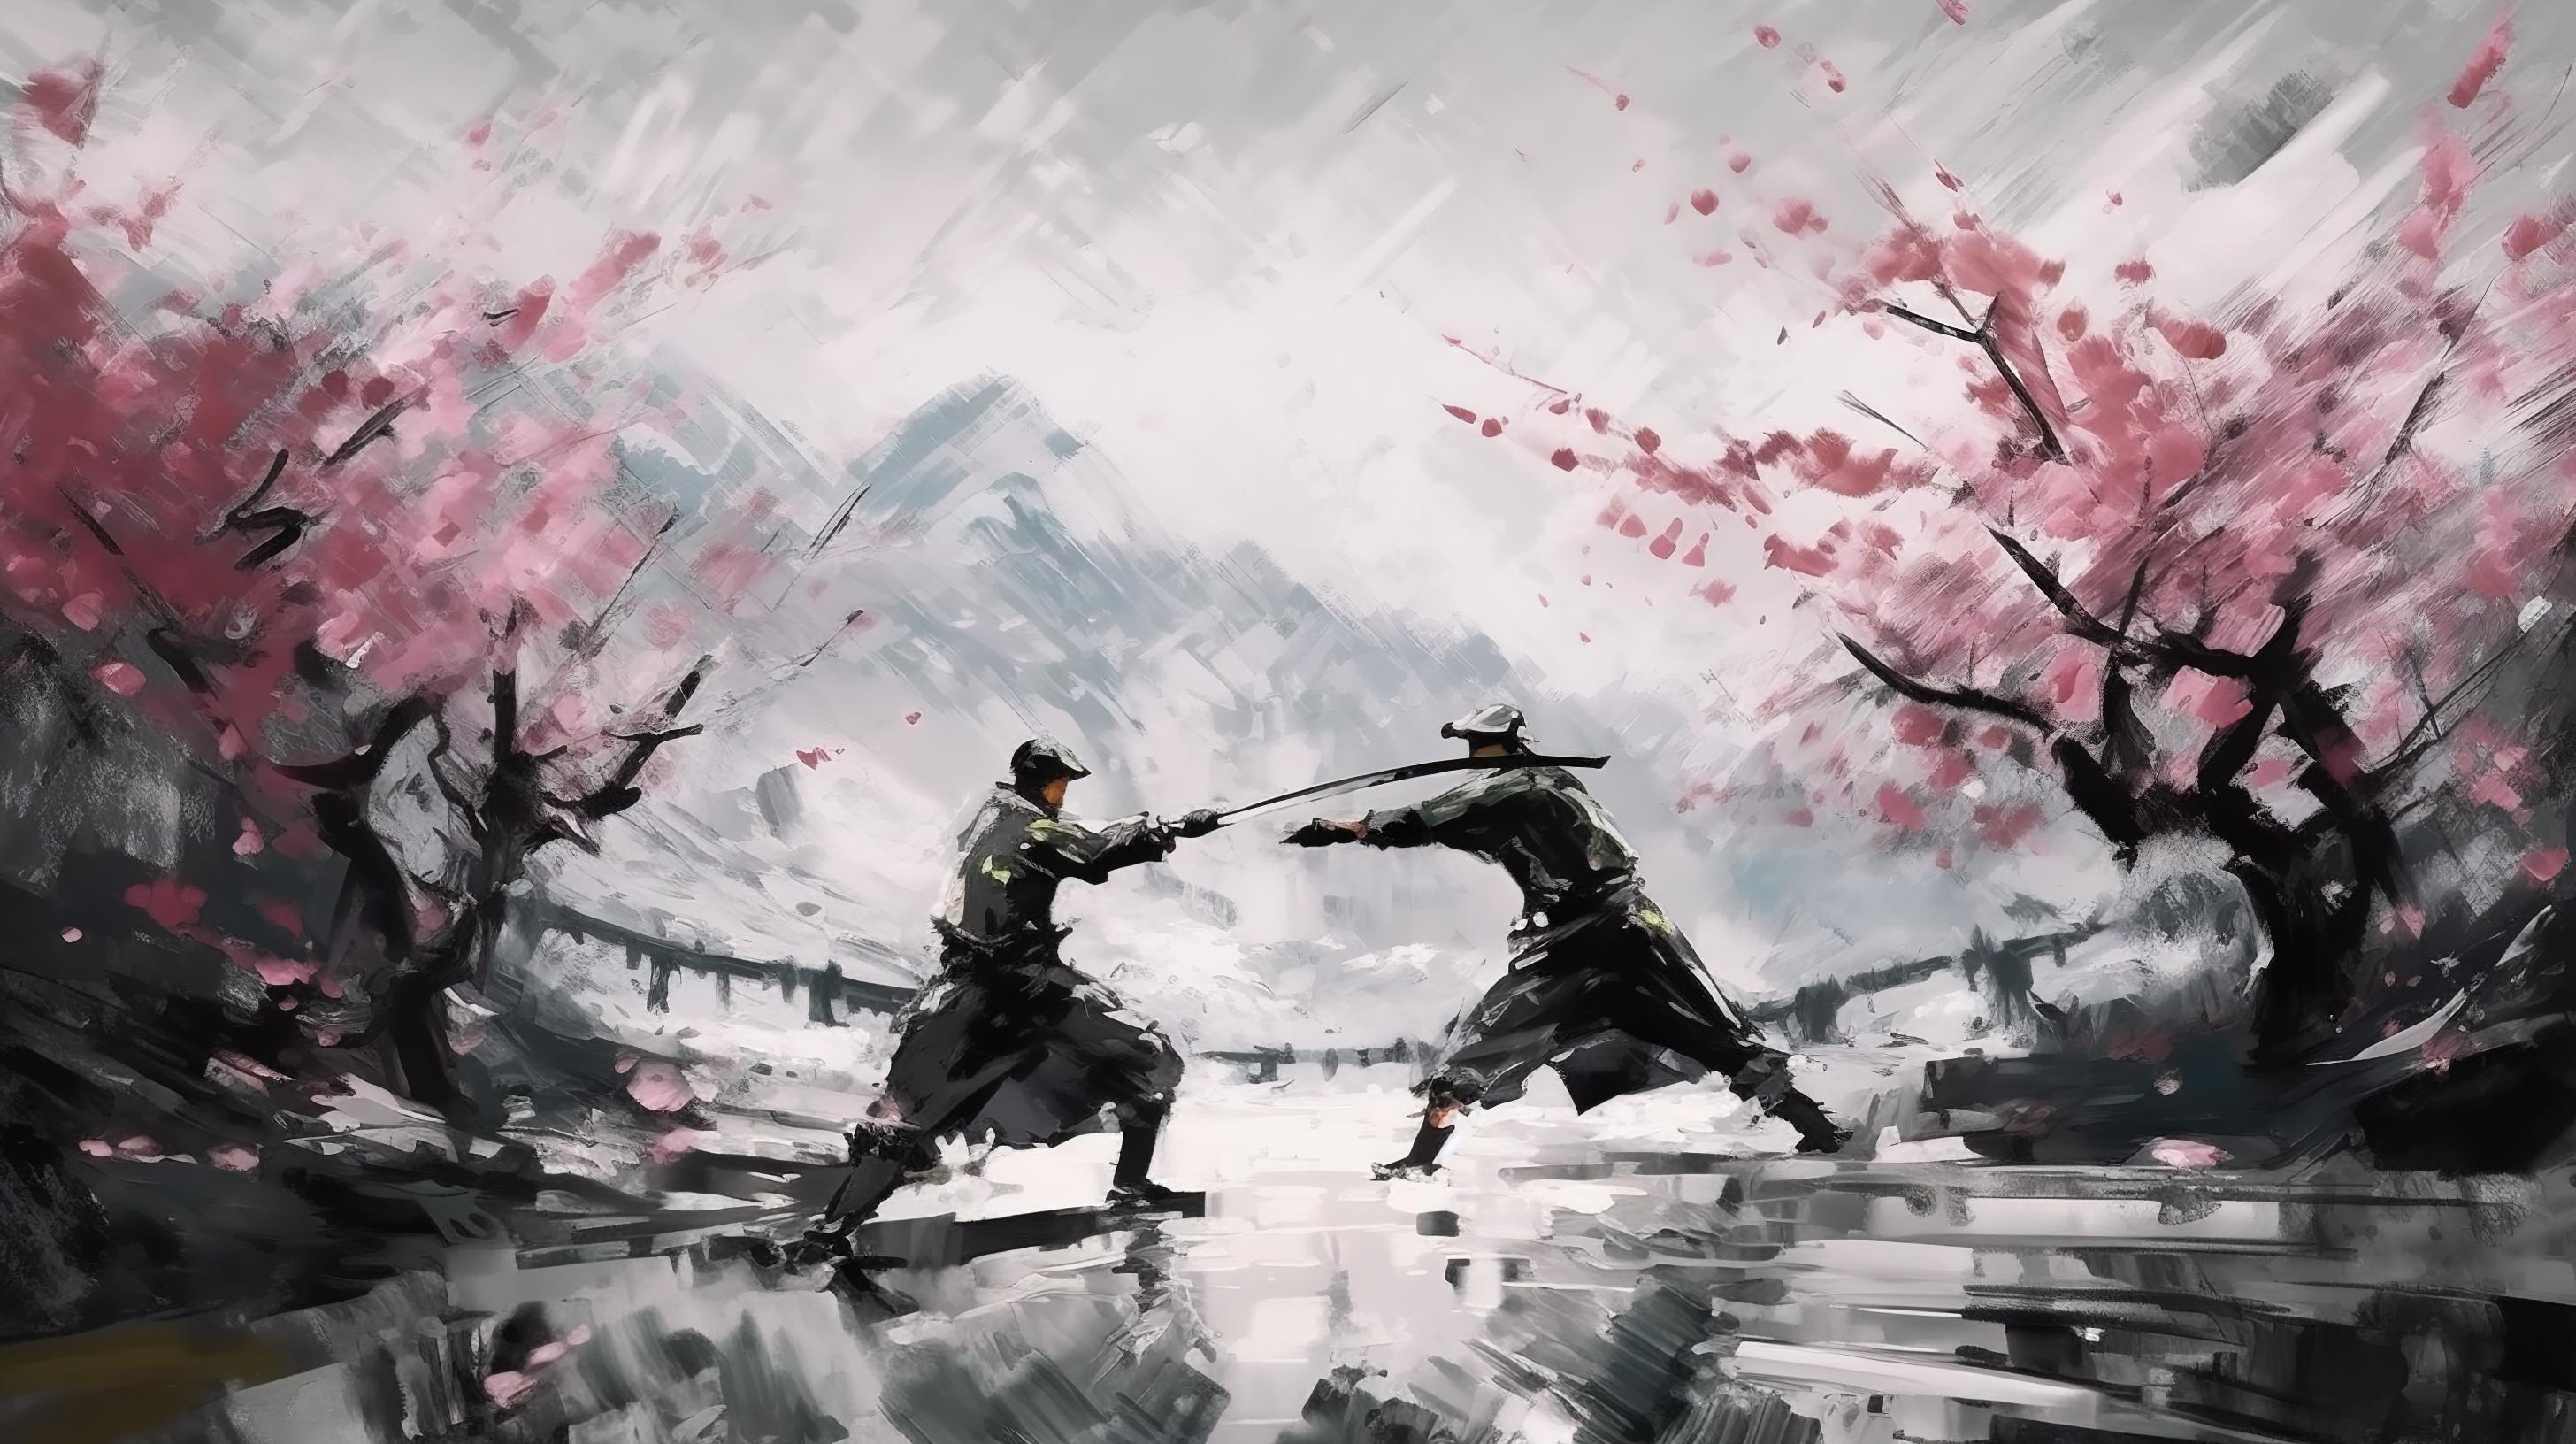 action_film_of_two_swordsmen_fighting_by_wu_guanzhong_by_willia-gigapixel-scale-2_00x_9.jpg